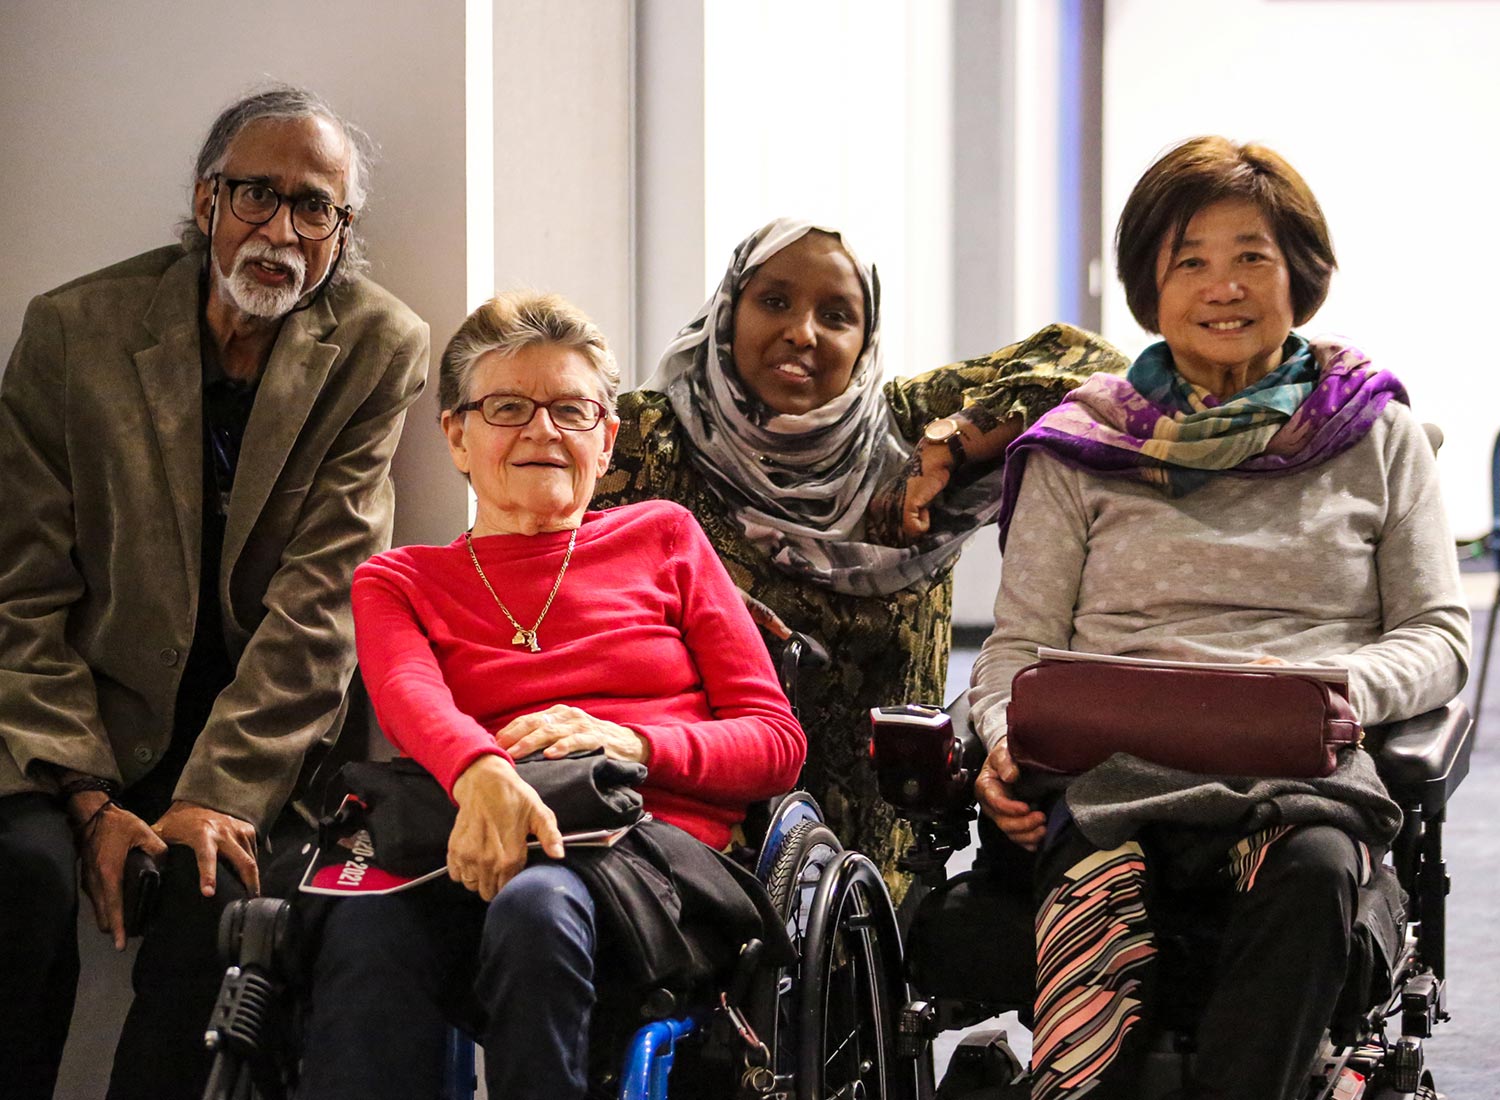 A group of PWdWA members and advocates smiling at the camera.